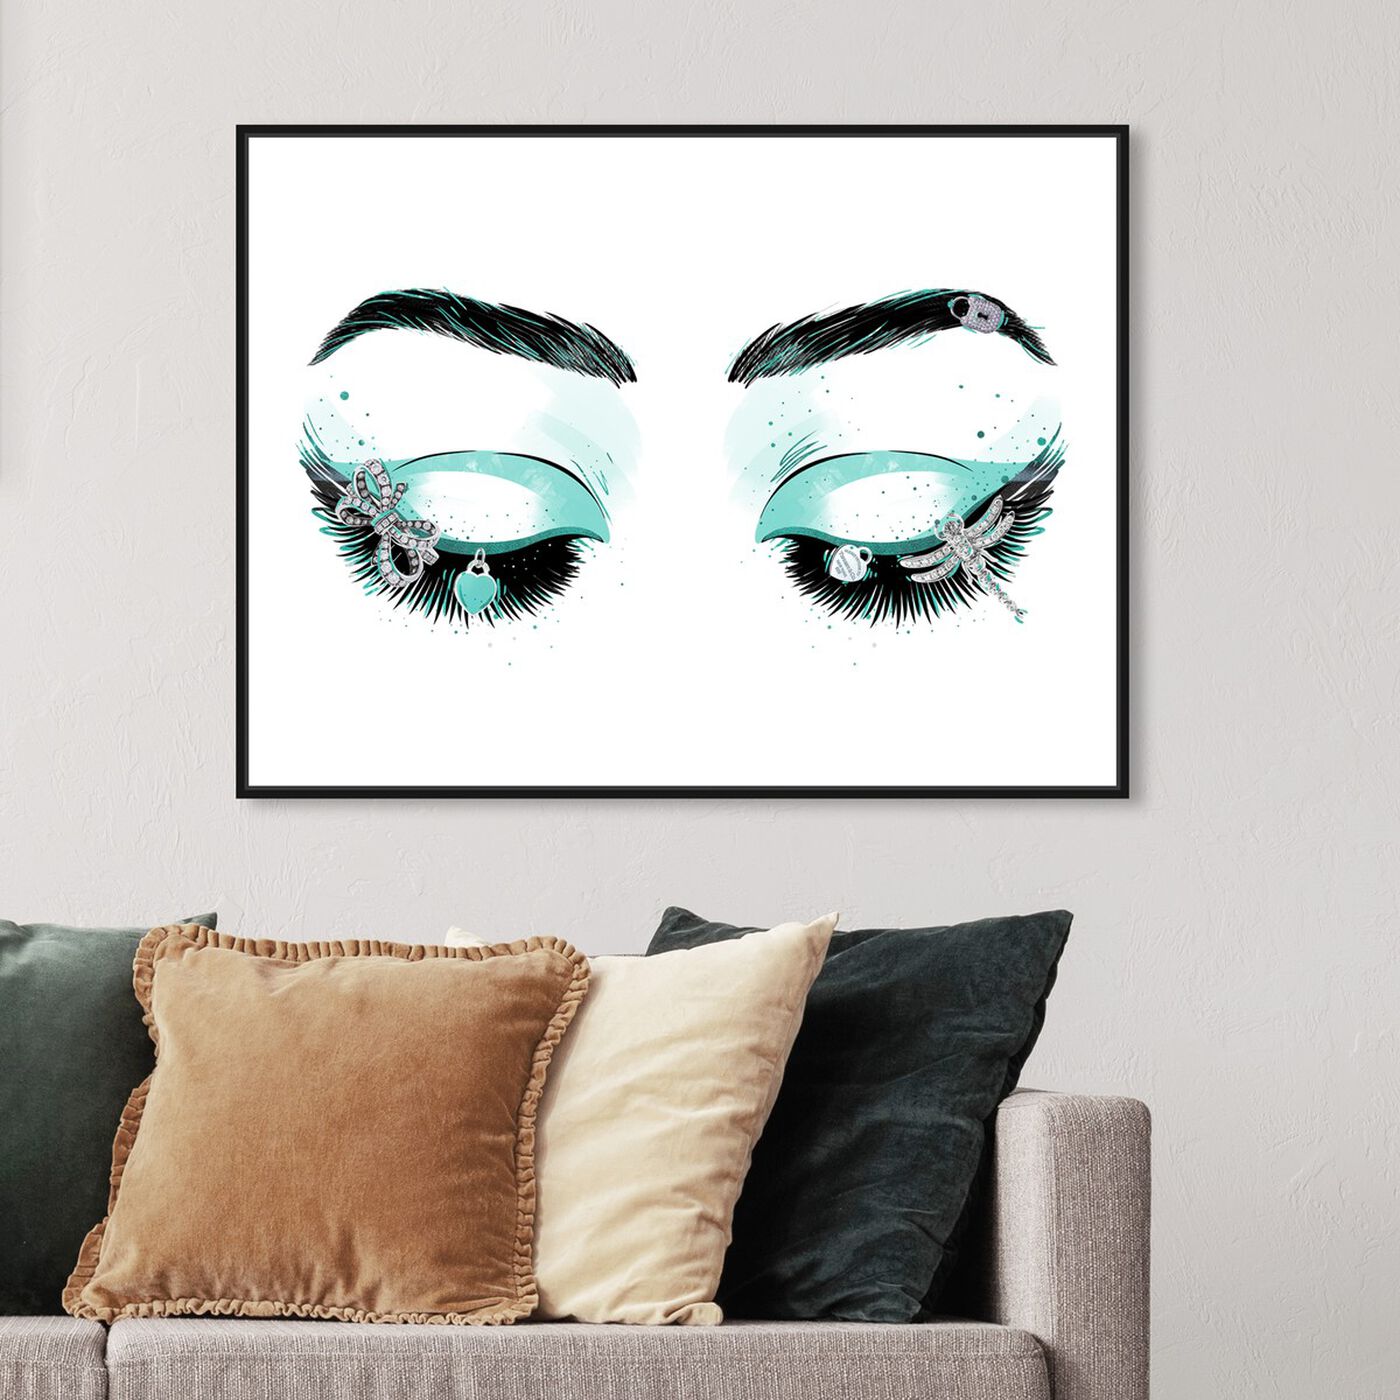 Hanging view of Aqua Glam Eyeshadows featuring fashion and glam and makeup art.